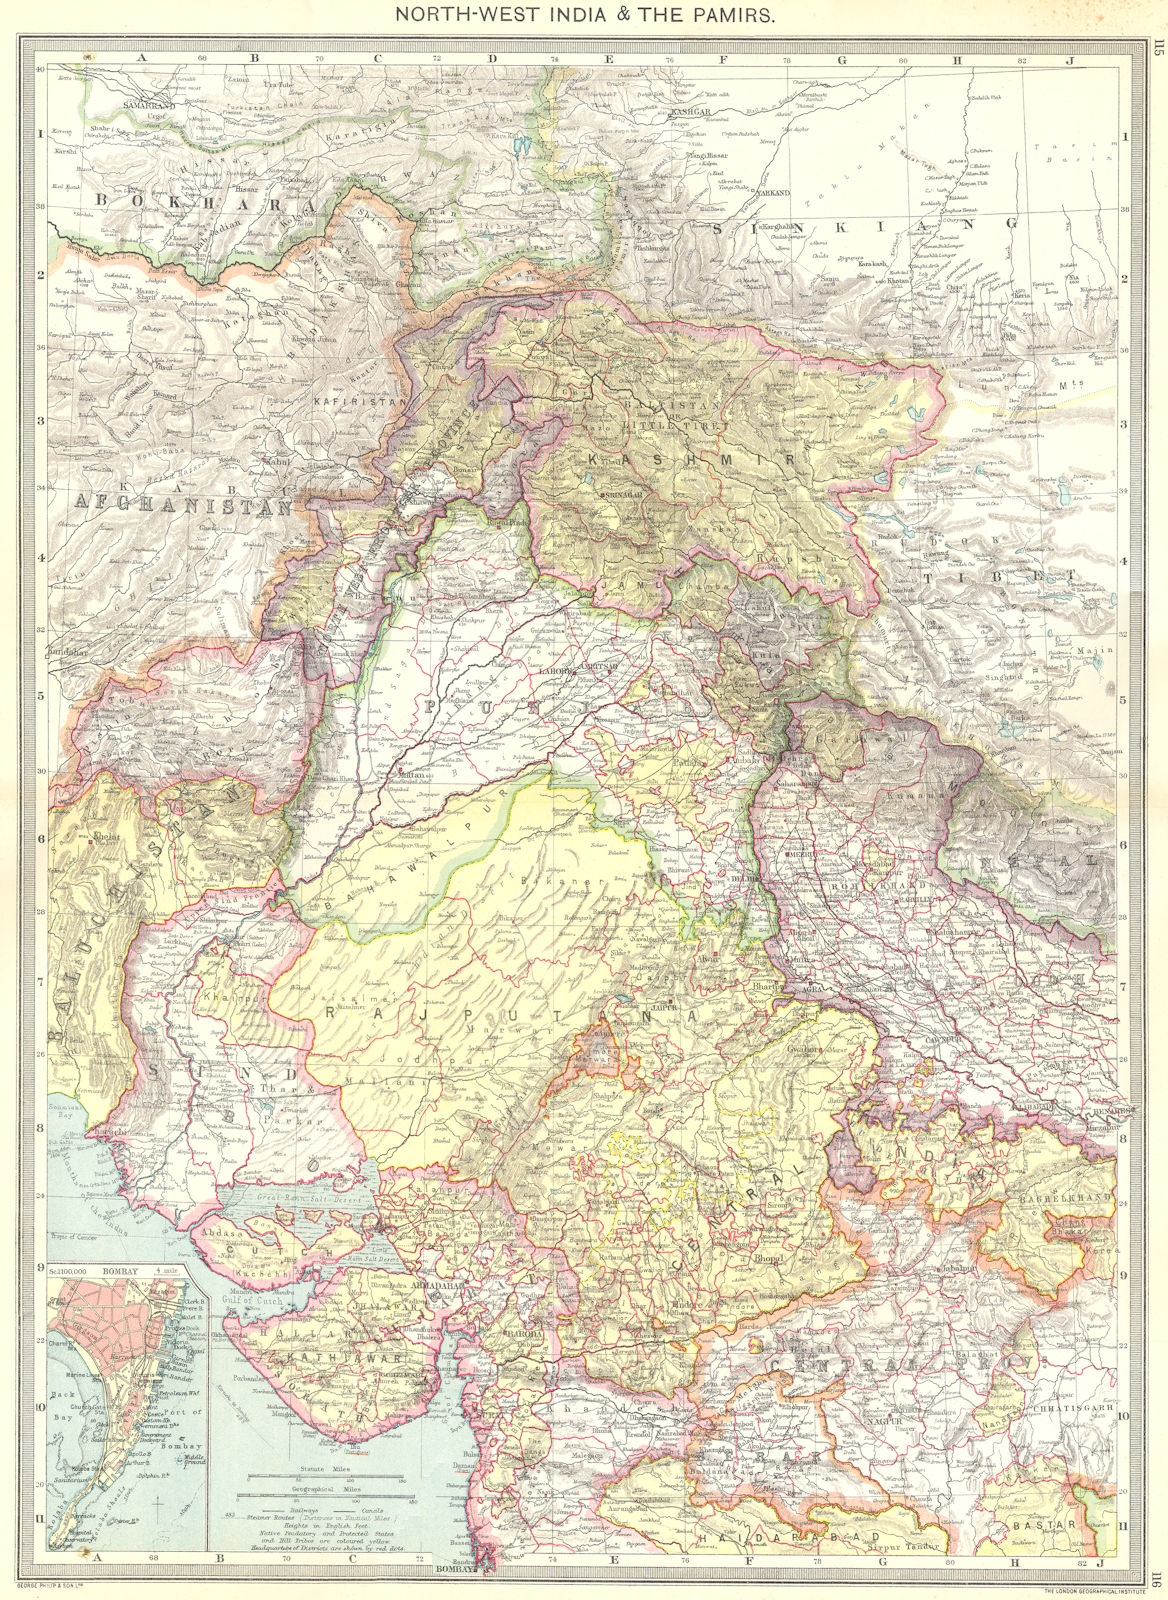 Associate Product INDIA. North-West India and The Pamirs; Inset map of Mumbai 1907 old